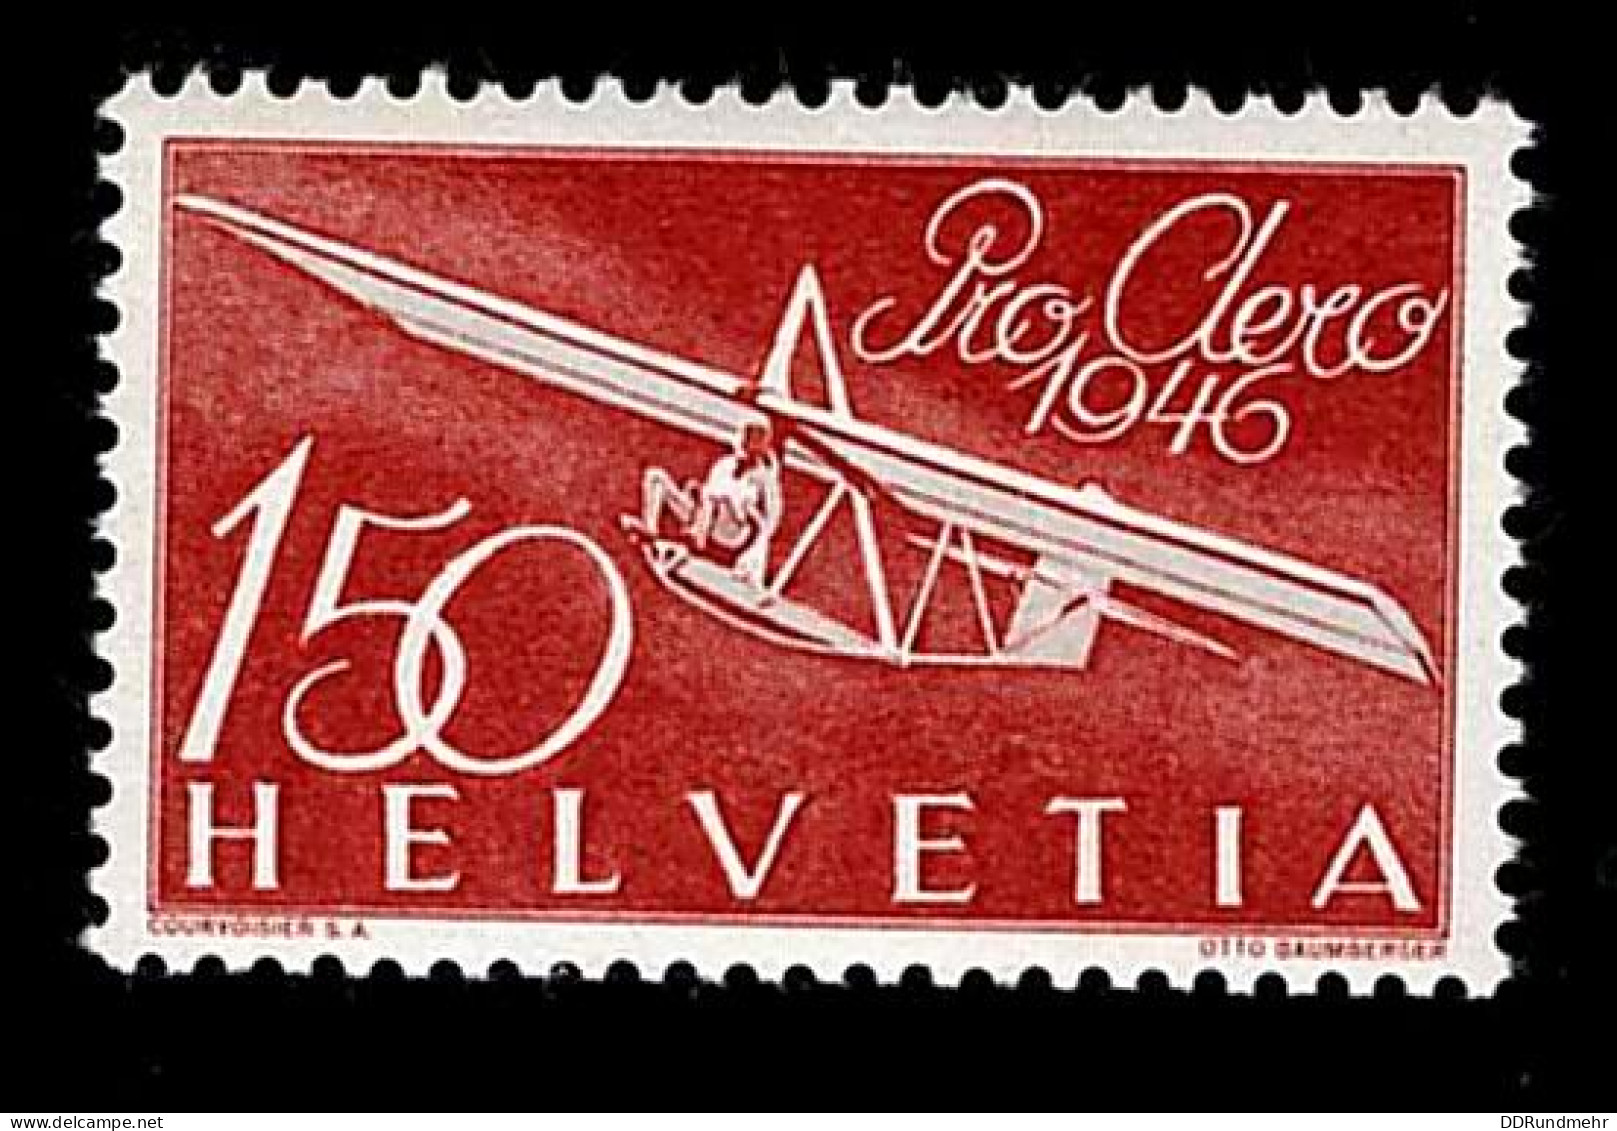 1946 Pro Aero  Michel CH 470 Stamp Number CH C41 Yvert Et Tellier CH PA40 Stanley Gibbons CH 466 Unificato CH A40 Xx MNH - Ungebraucht